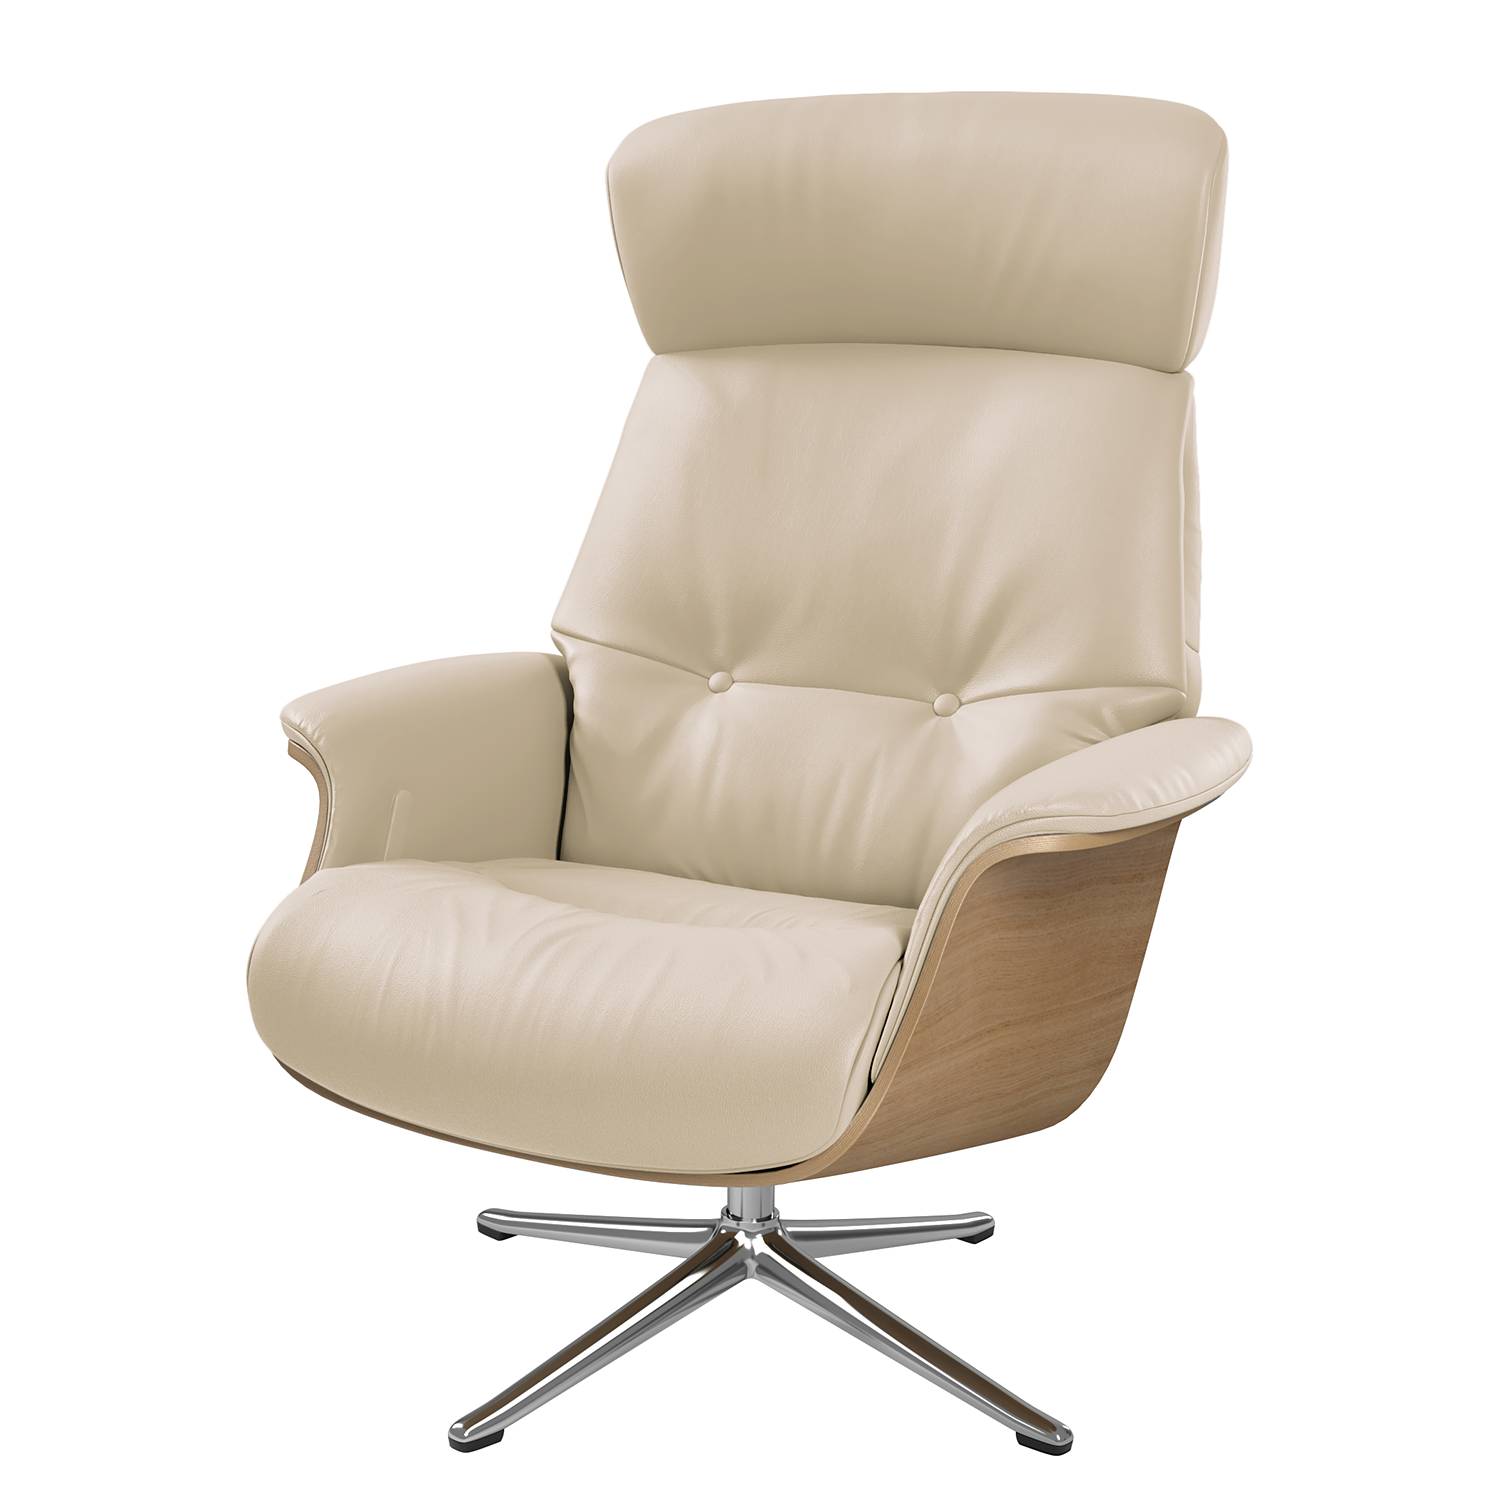 Image of Fauteuil relax Anderson I 000000001000131279